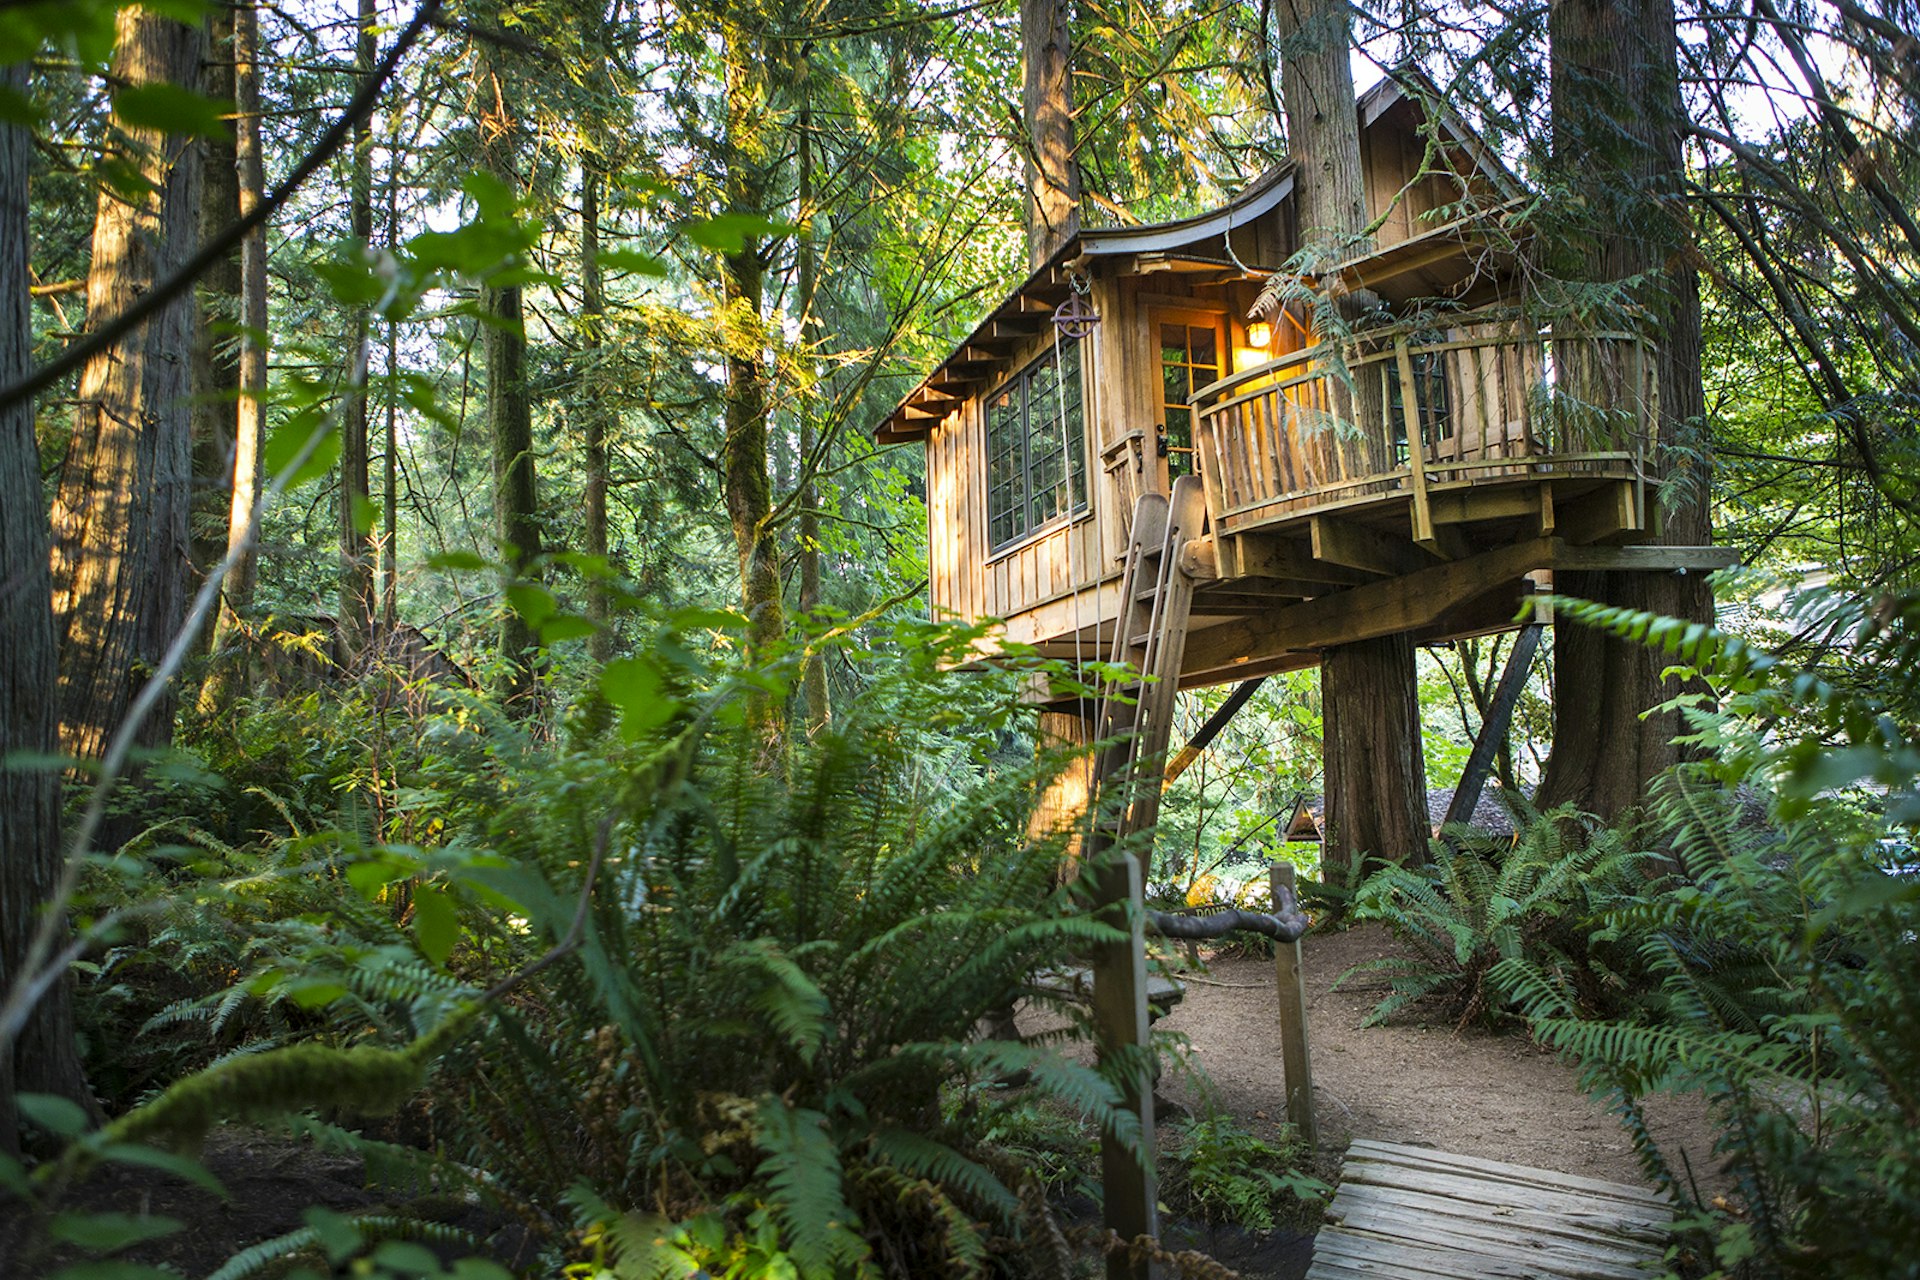 Exterior of one of the lodgings at TreeHouse Point © Adam Crowley (www.adamcrowley.com)